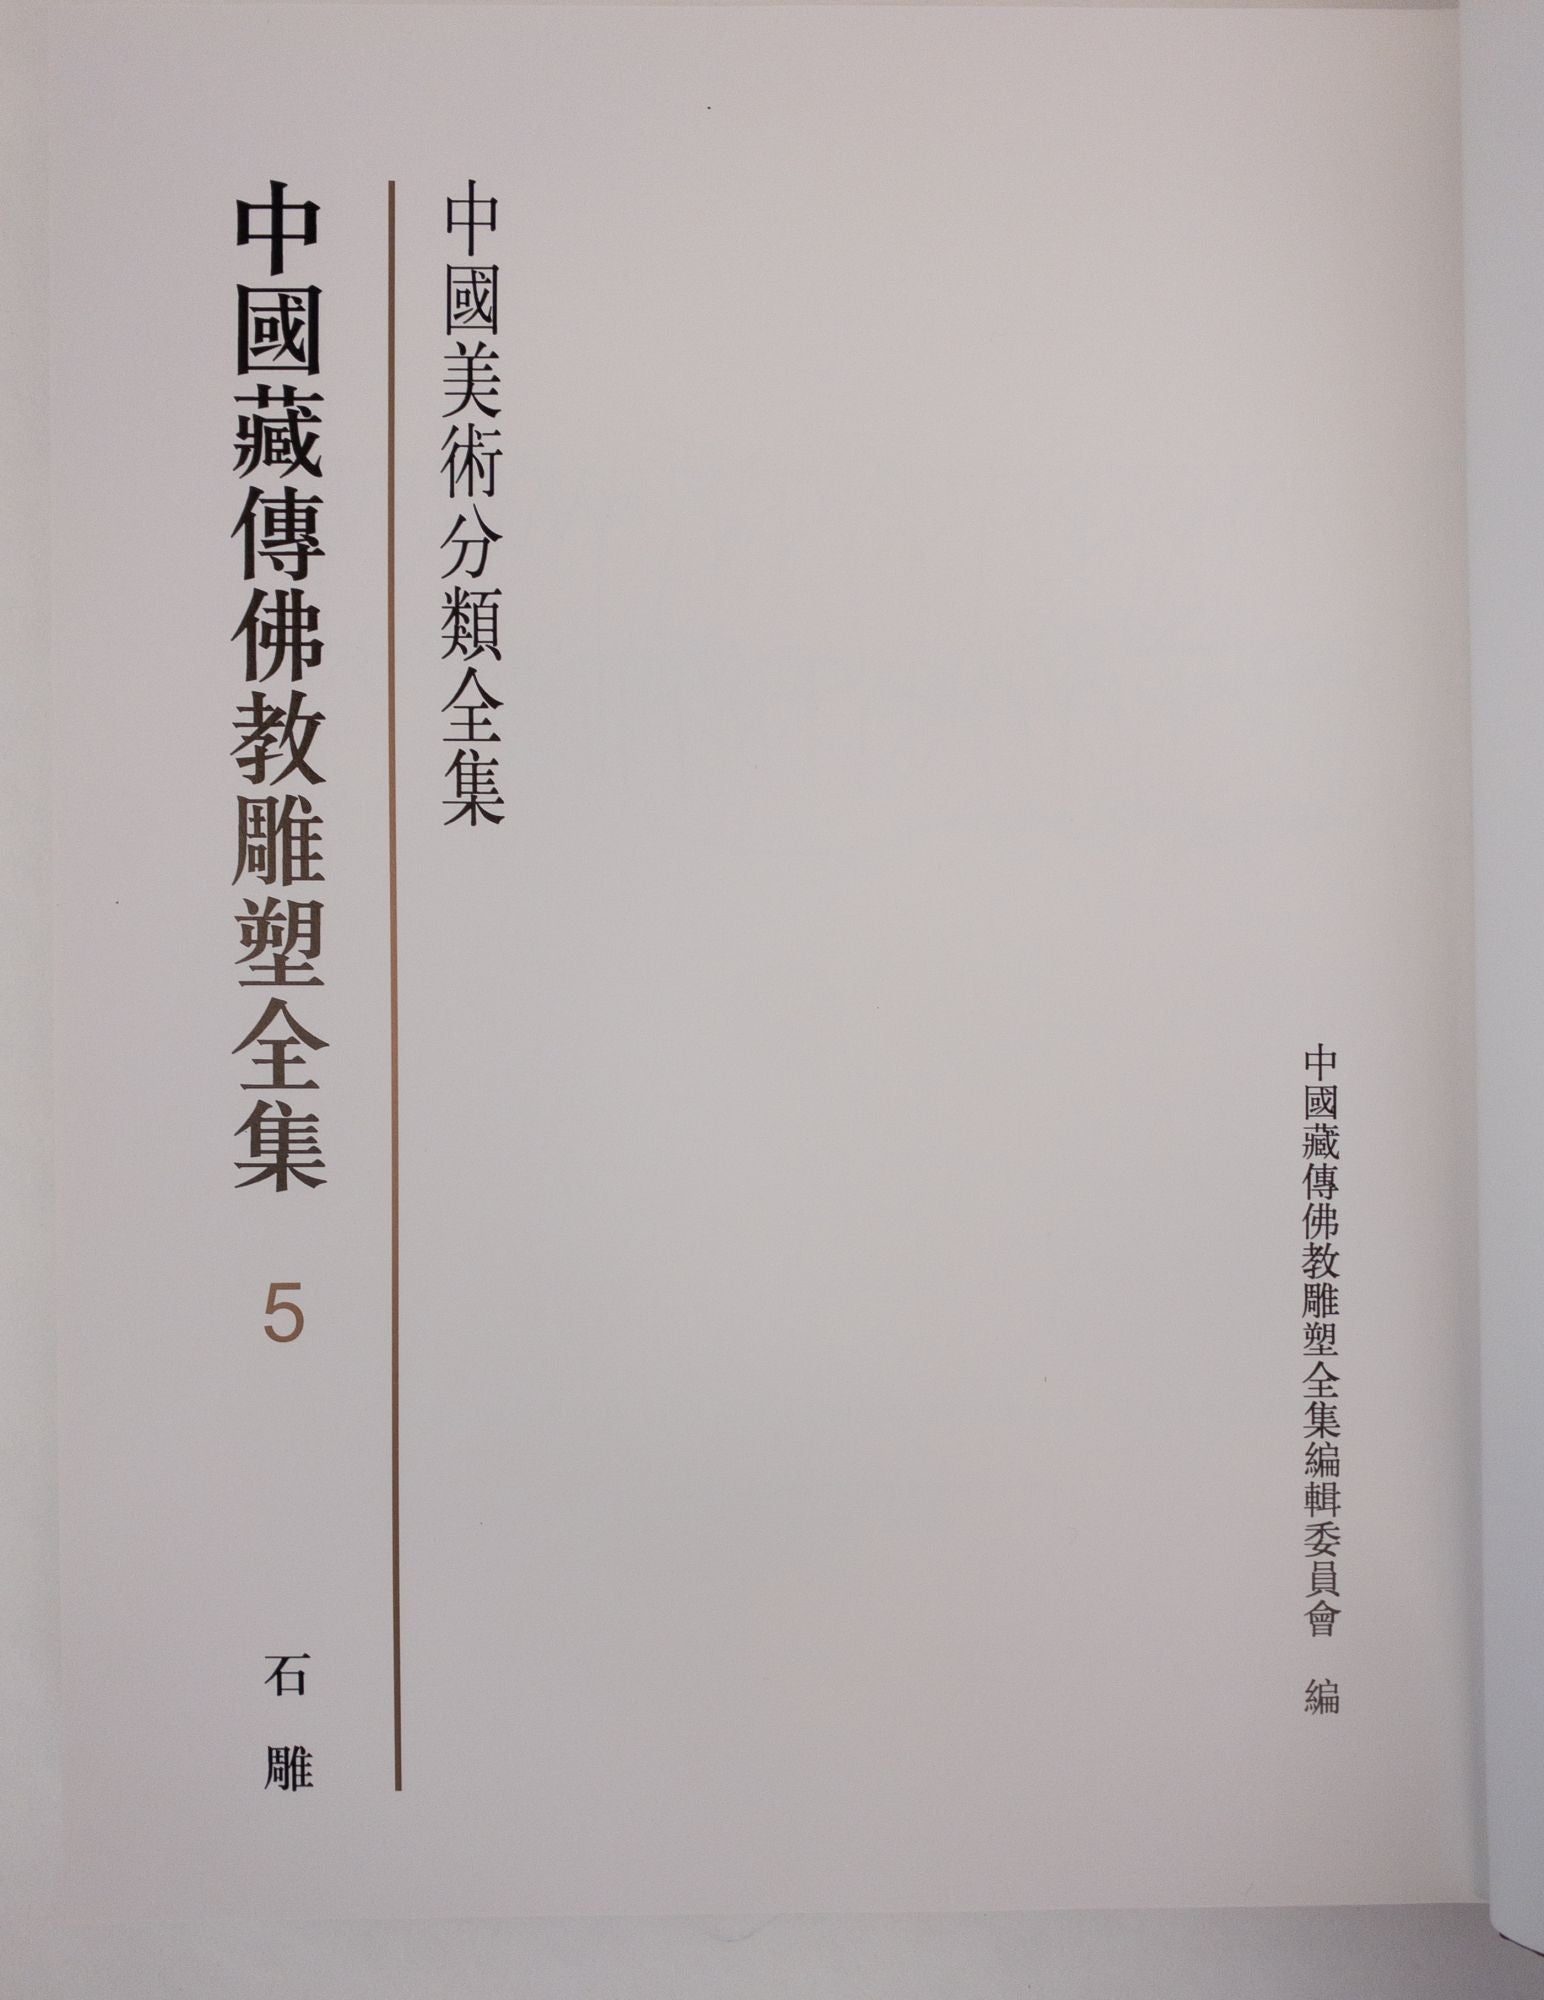 Product Image for [CHINESE BUDDHIST SCULPTURE COLLECTION] [Six Volumes]